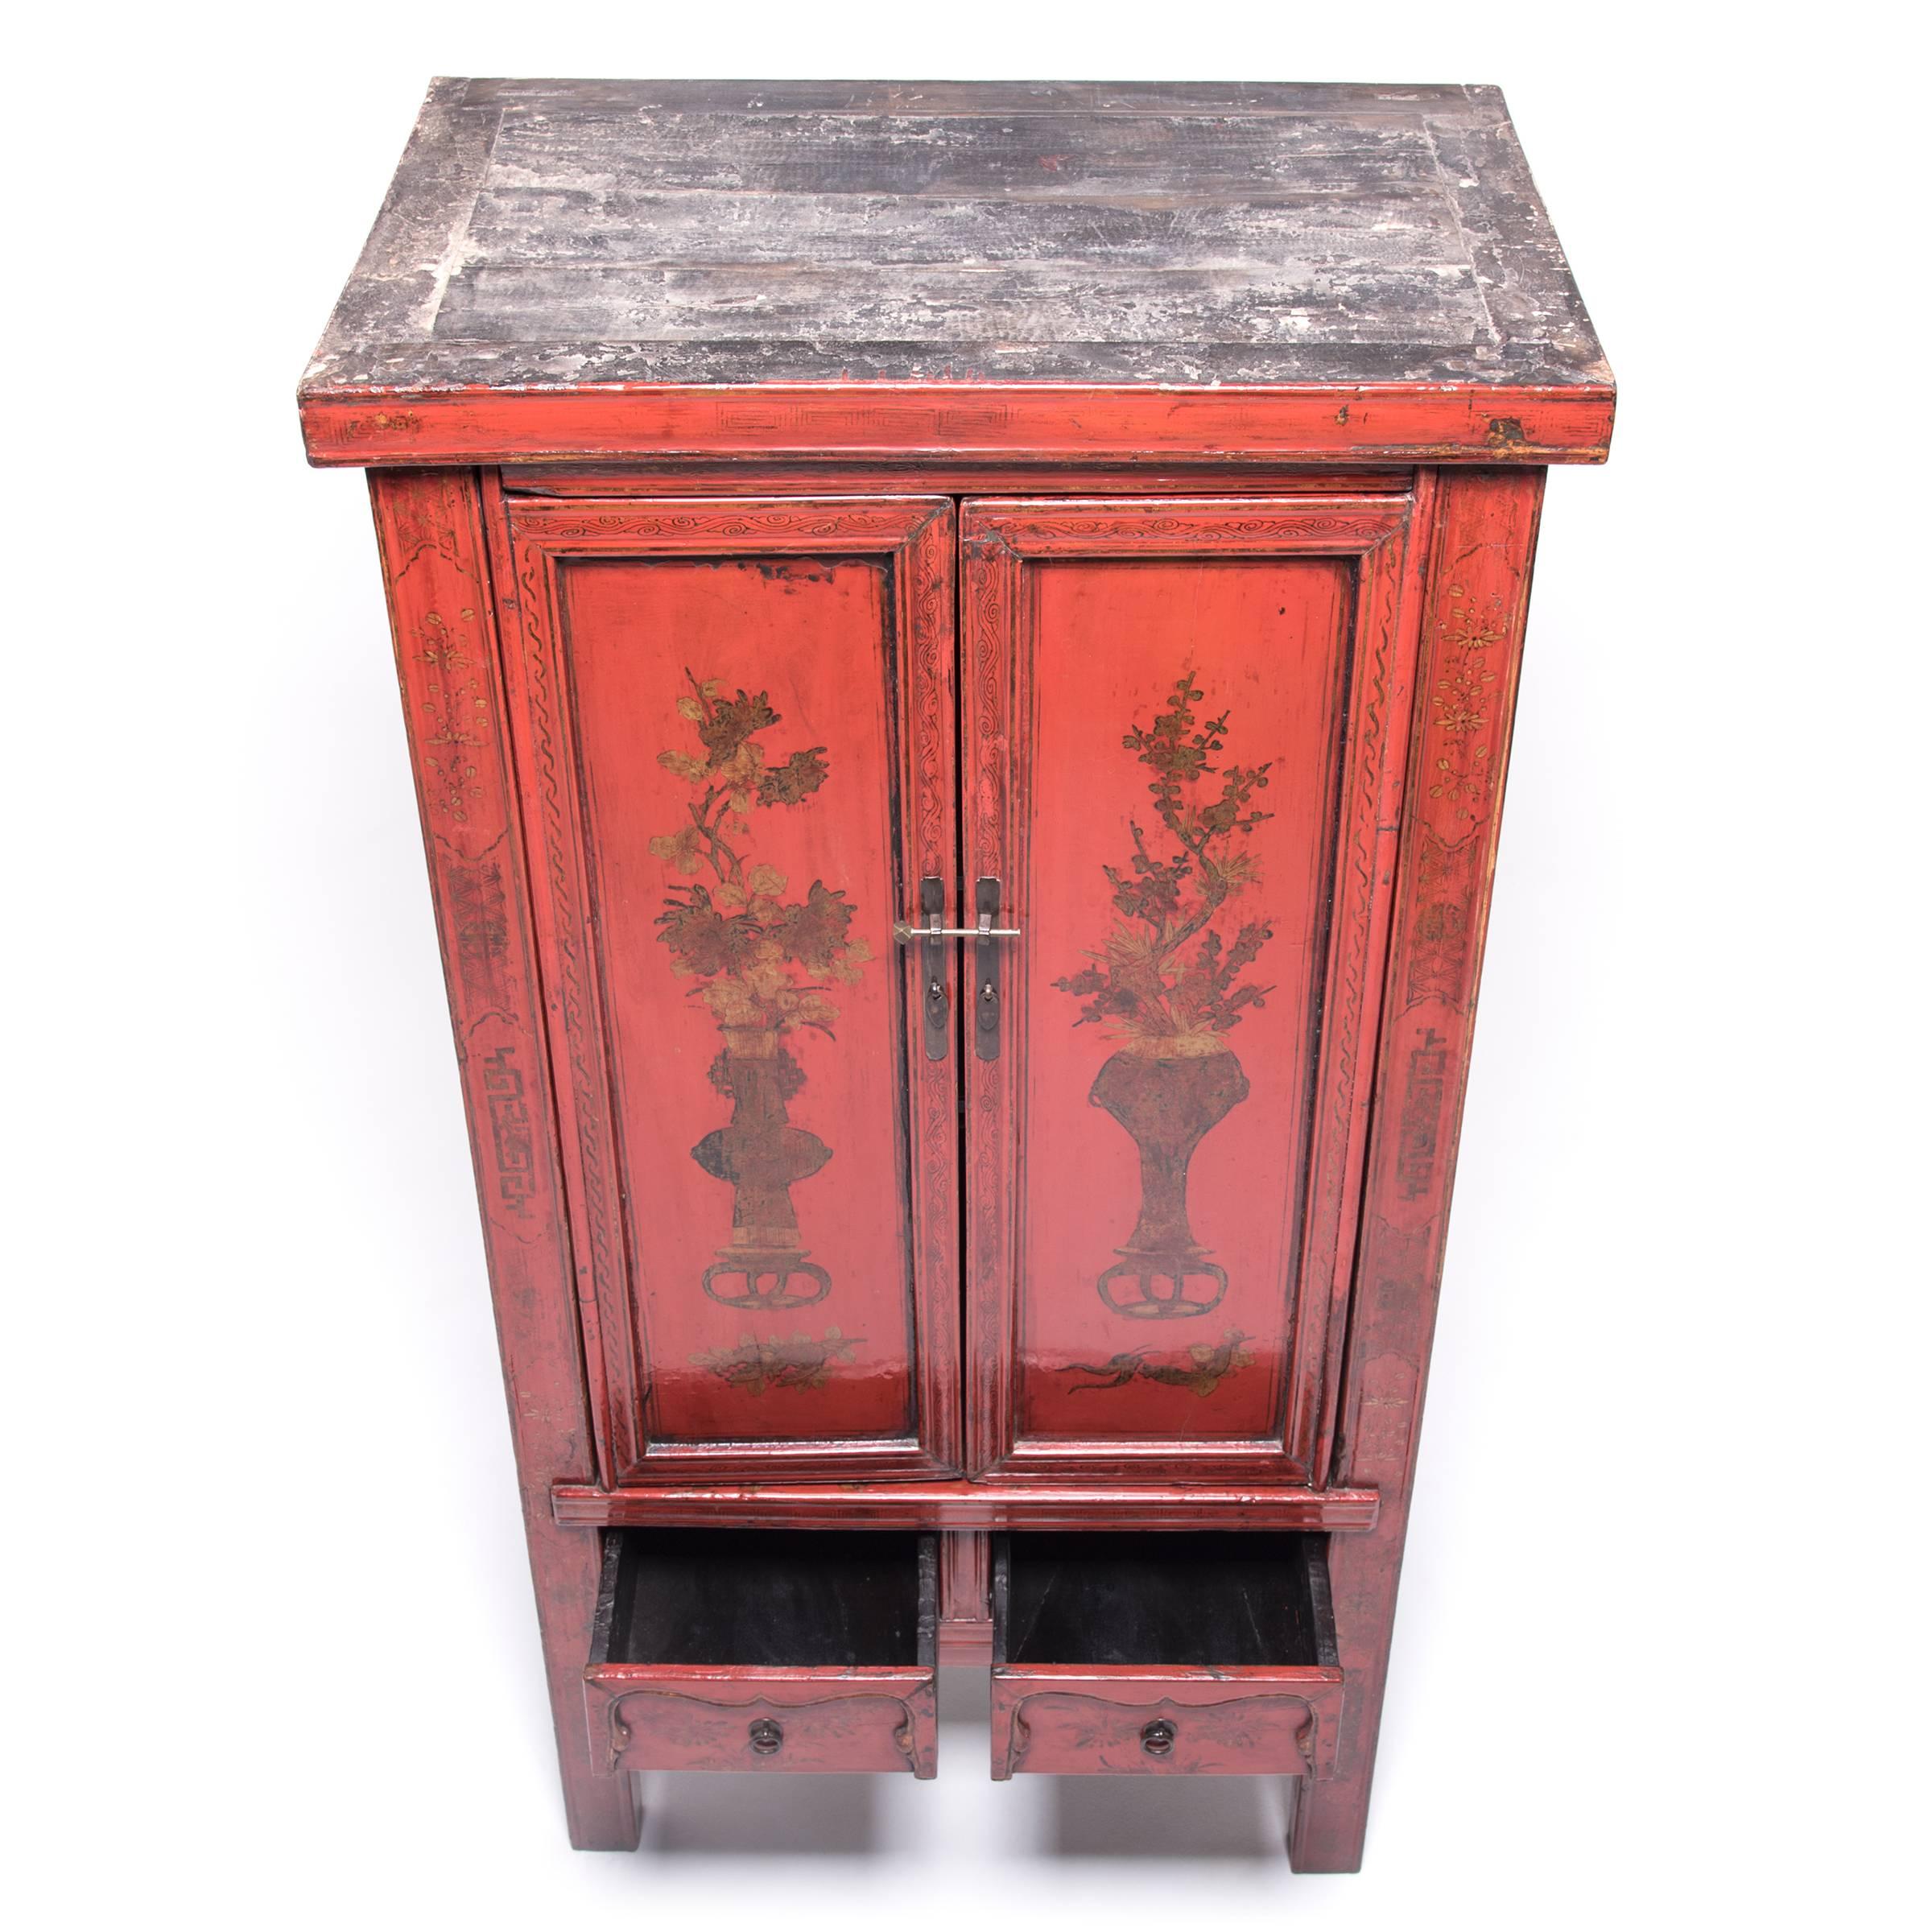 19th Century Chinese Red Lacquer Painted Cabinet, c. 1850